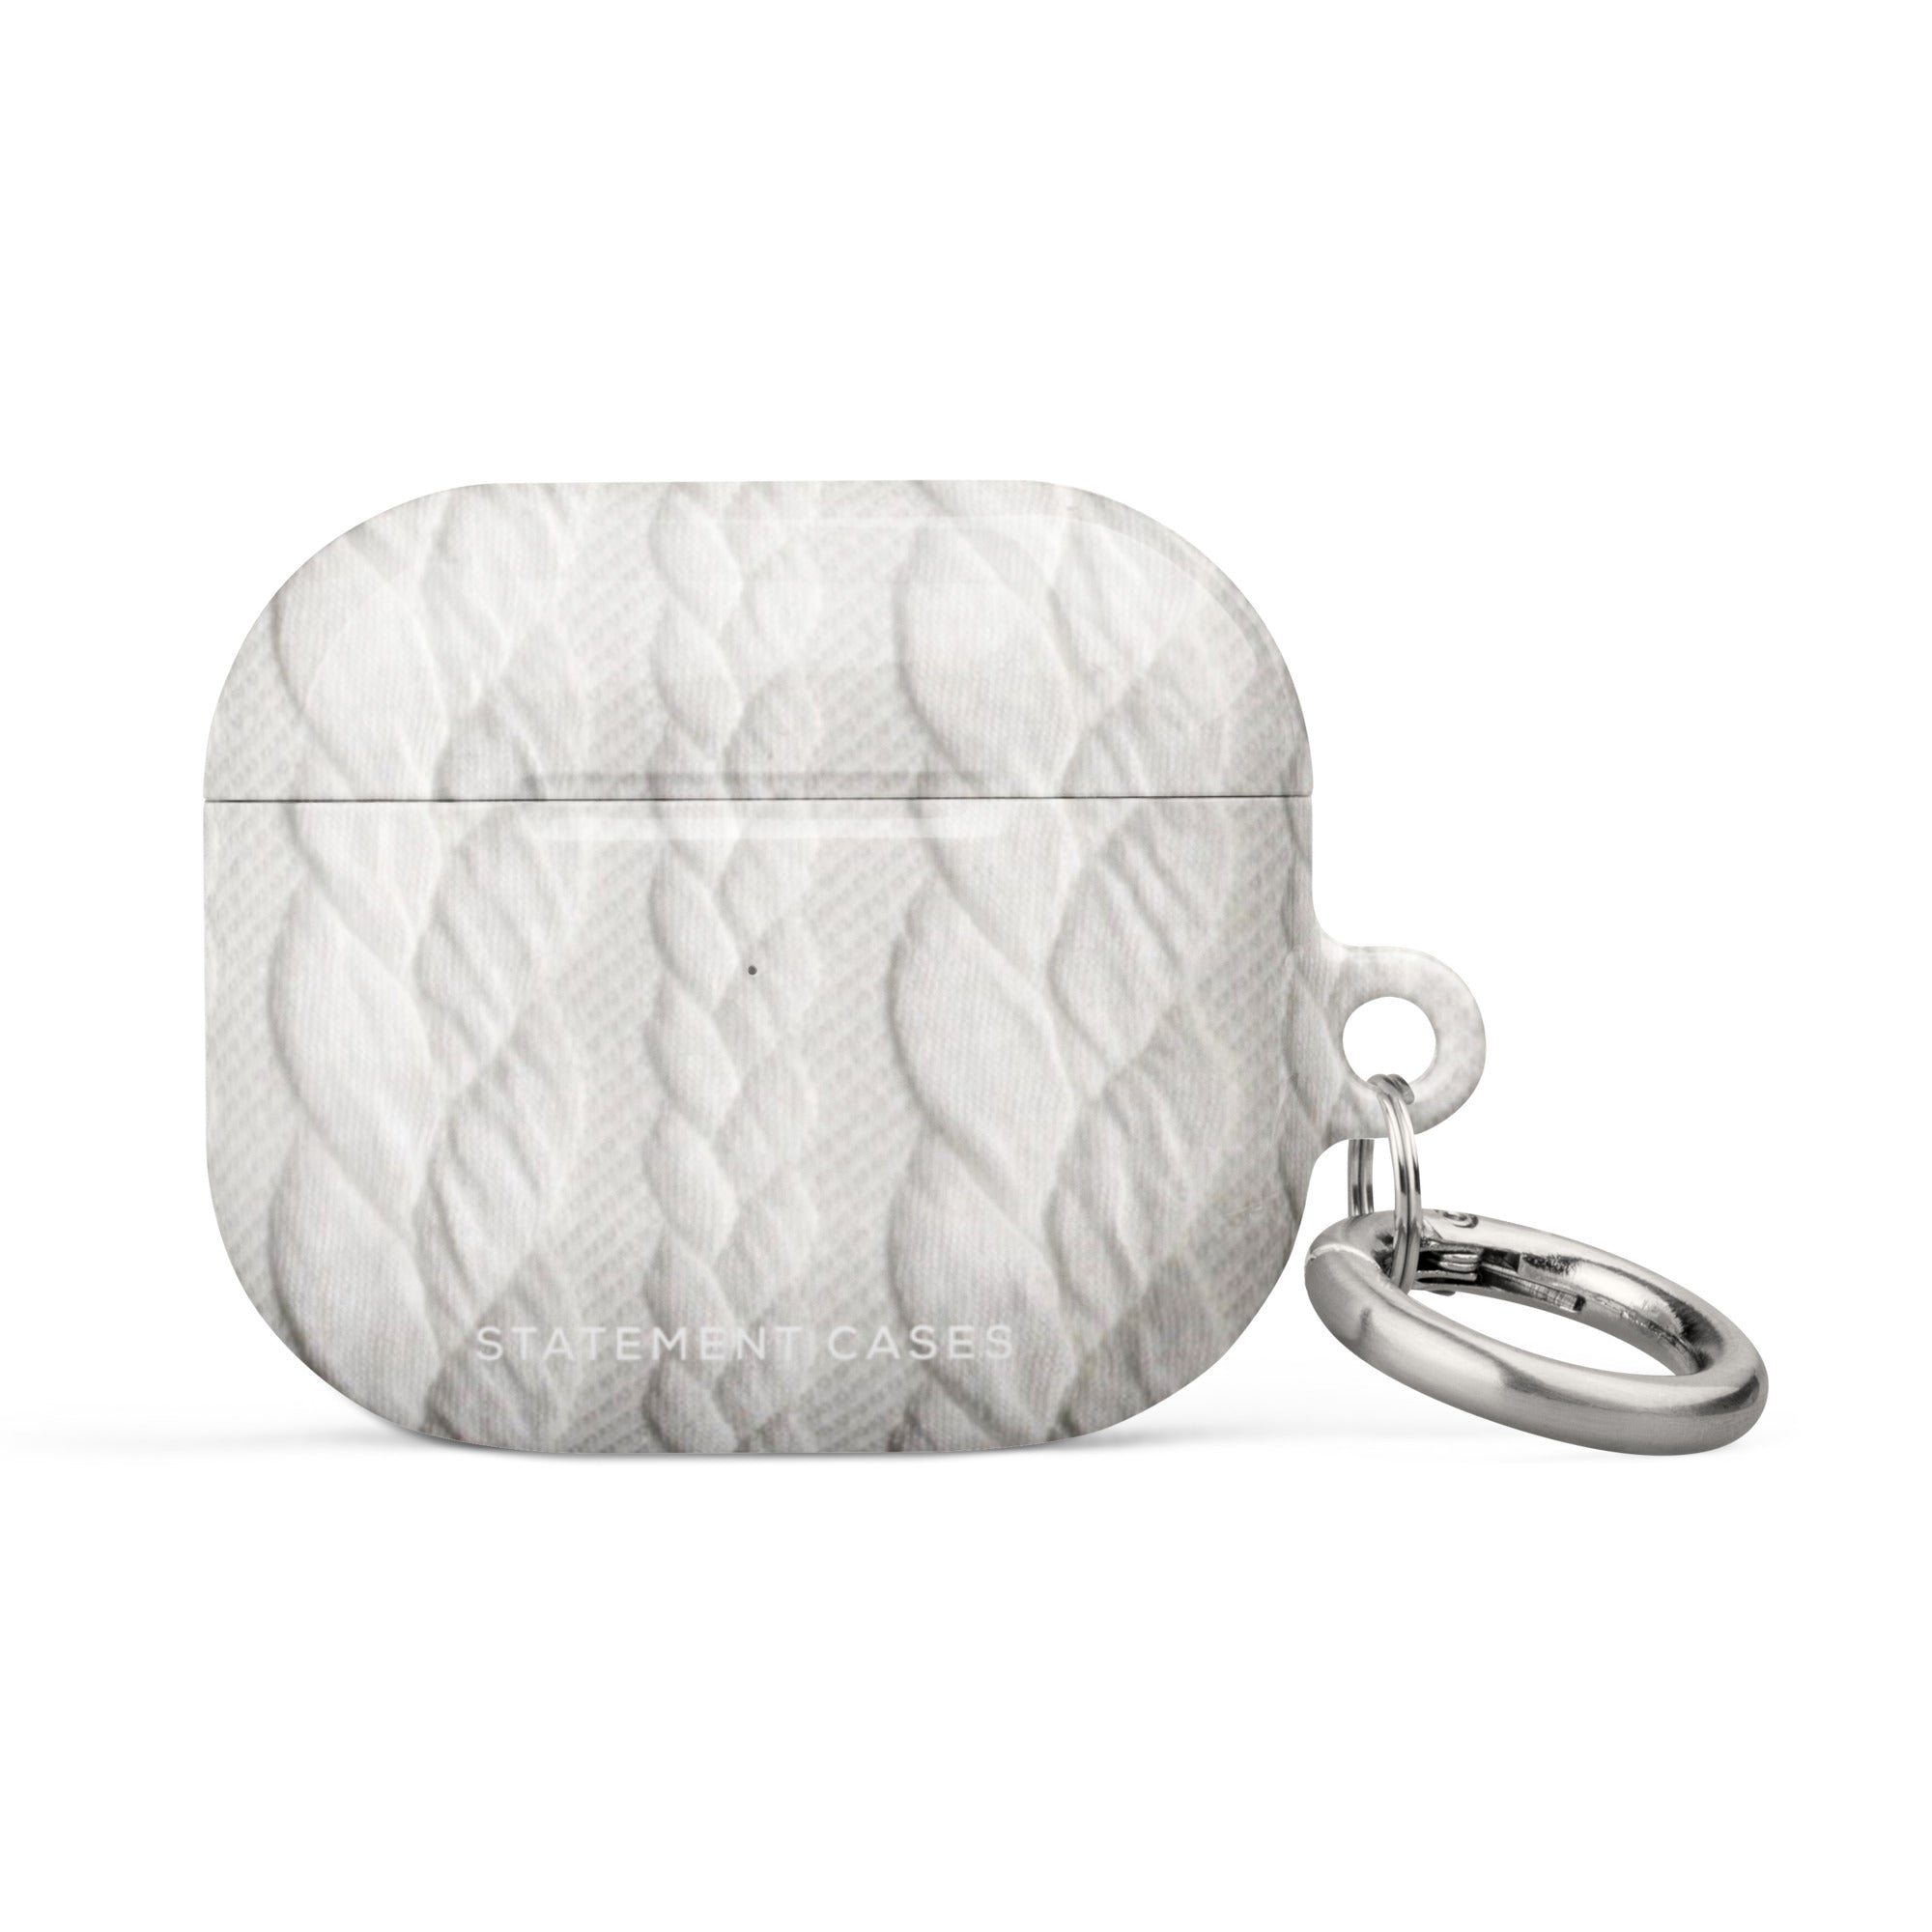 A white, impact-absorbing Cozy Knit Bliss for AirPods Gen 3 case with a knitted texture design and a metal carabiner attached to the side. The brand "Statement Cases" is printed at the bottom, ensuring both style and protection.